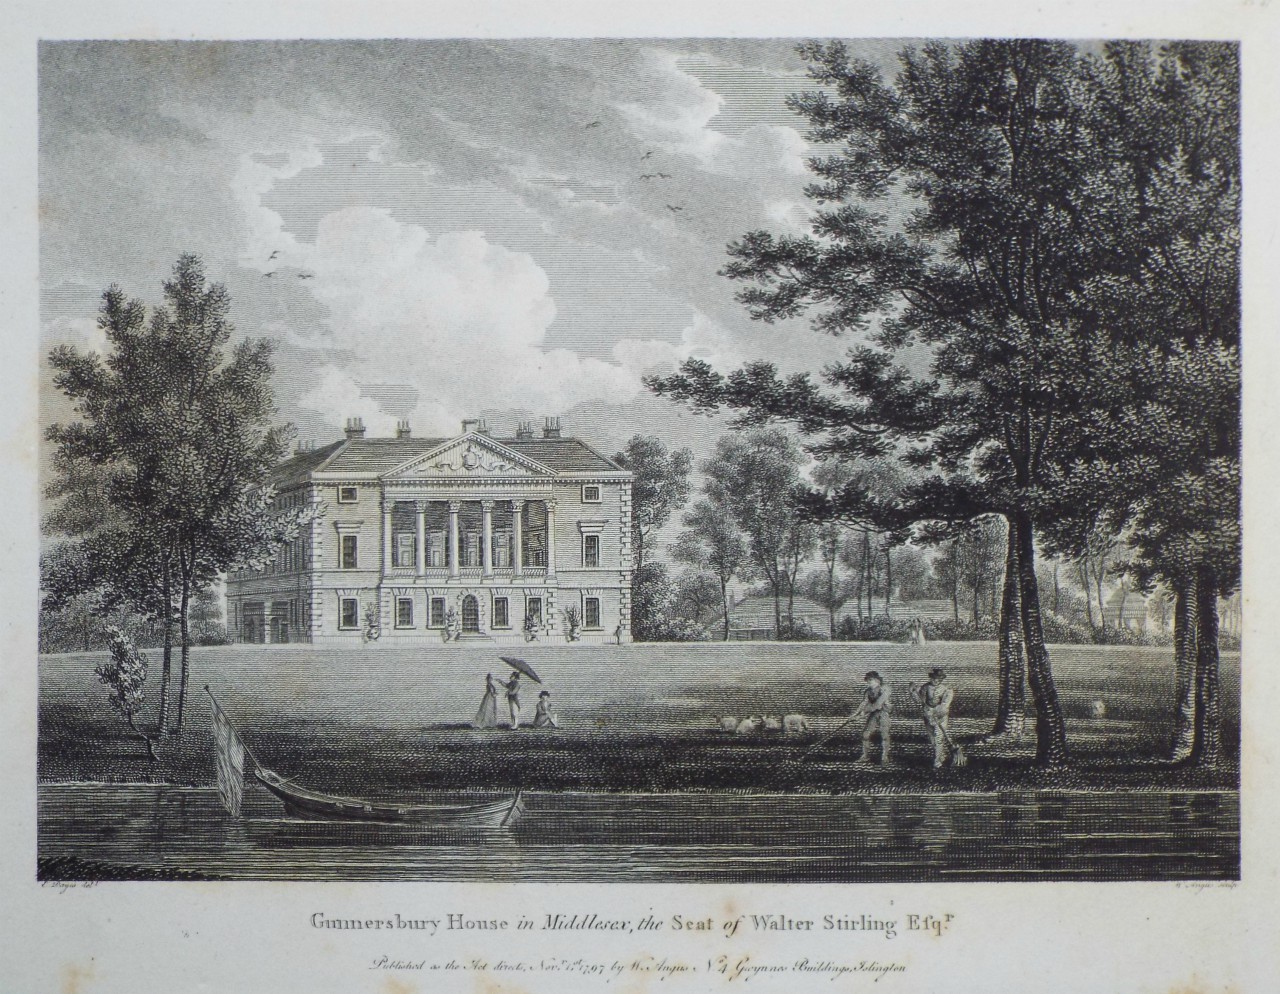 Print - Gunnersbury House in Middlesex, the Seat of Walter Stirling Esqr. - Angus